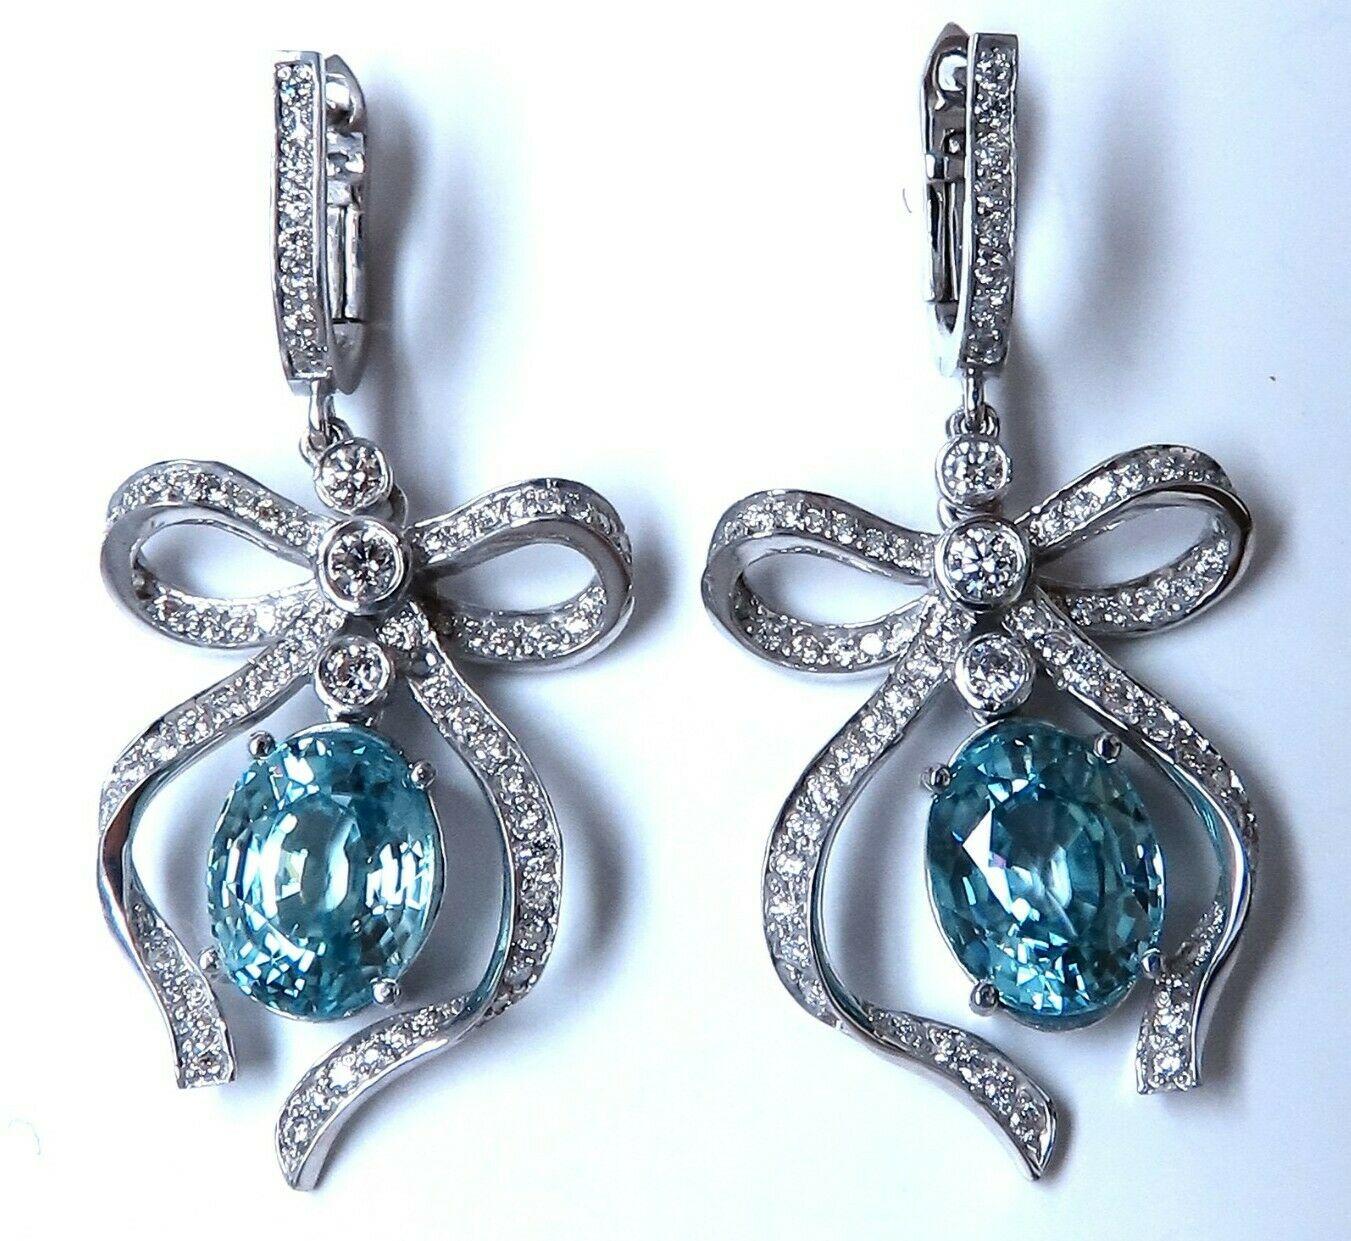 Blue zircon Ribbon dangle earrings.

9.95ct Natural Oval Blue Zircons.

9.7 x 7.6mm

Vivid indigo blue clean clarity and transparent

1.10 carat natural round billion diamonds

G color vs2 clarity

14 karat white gold 11 g

Earrings 1.5 in Long &